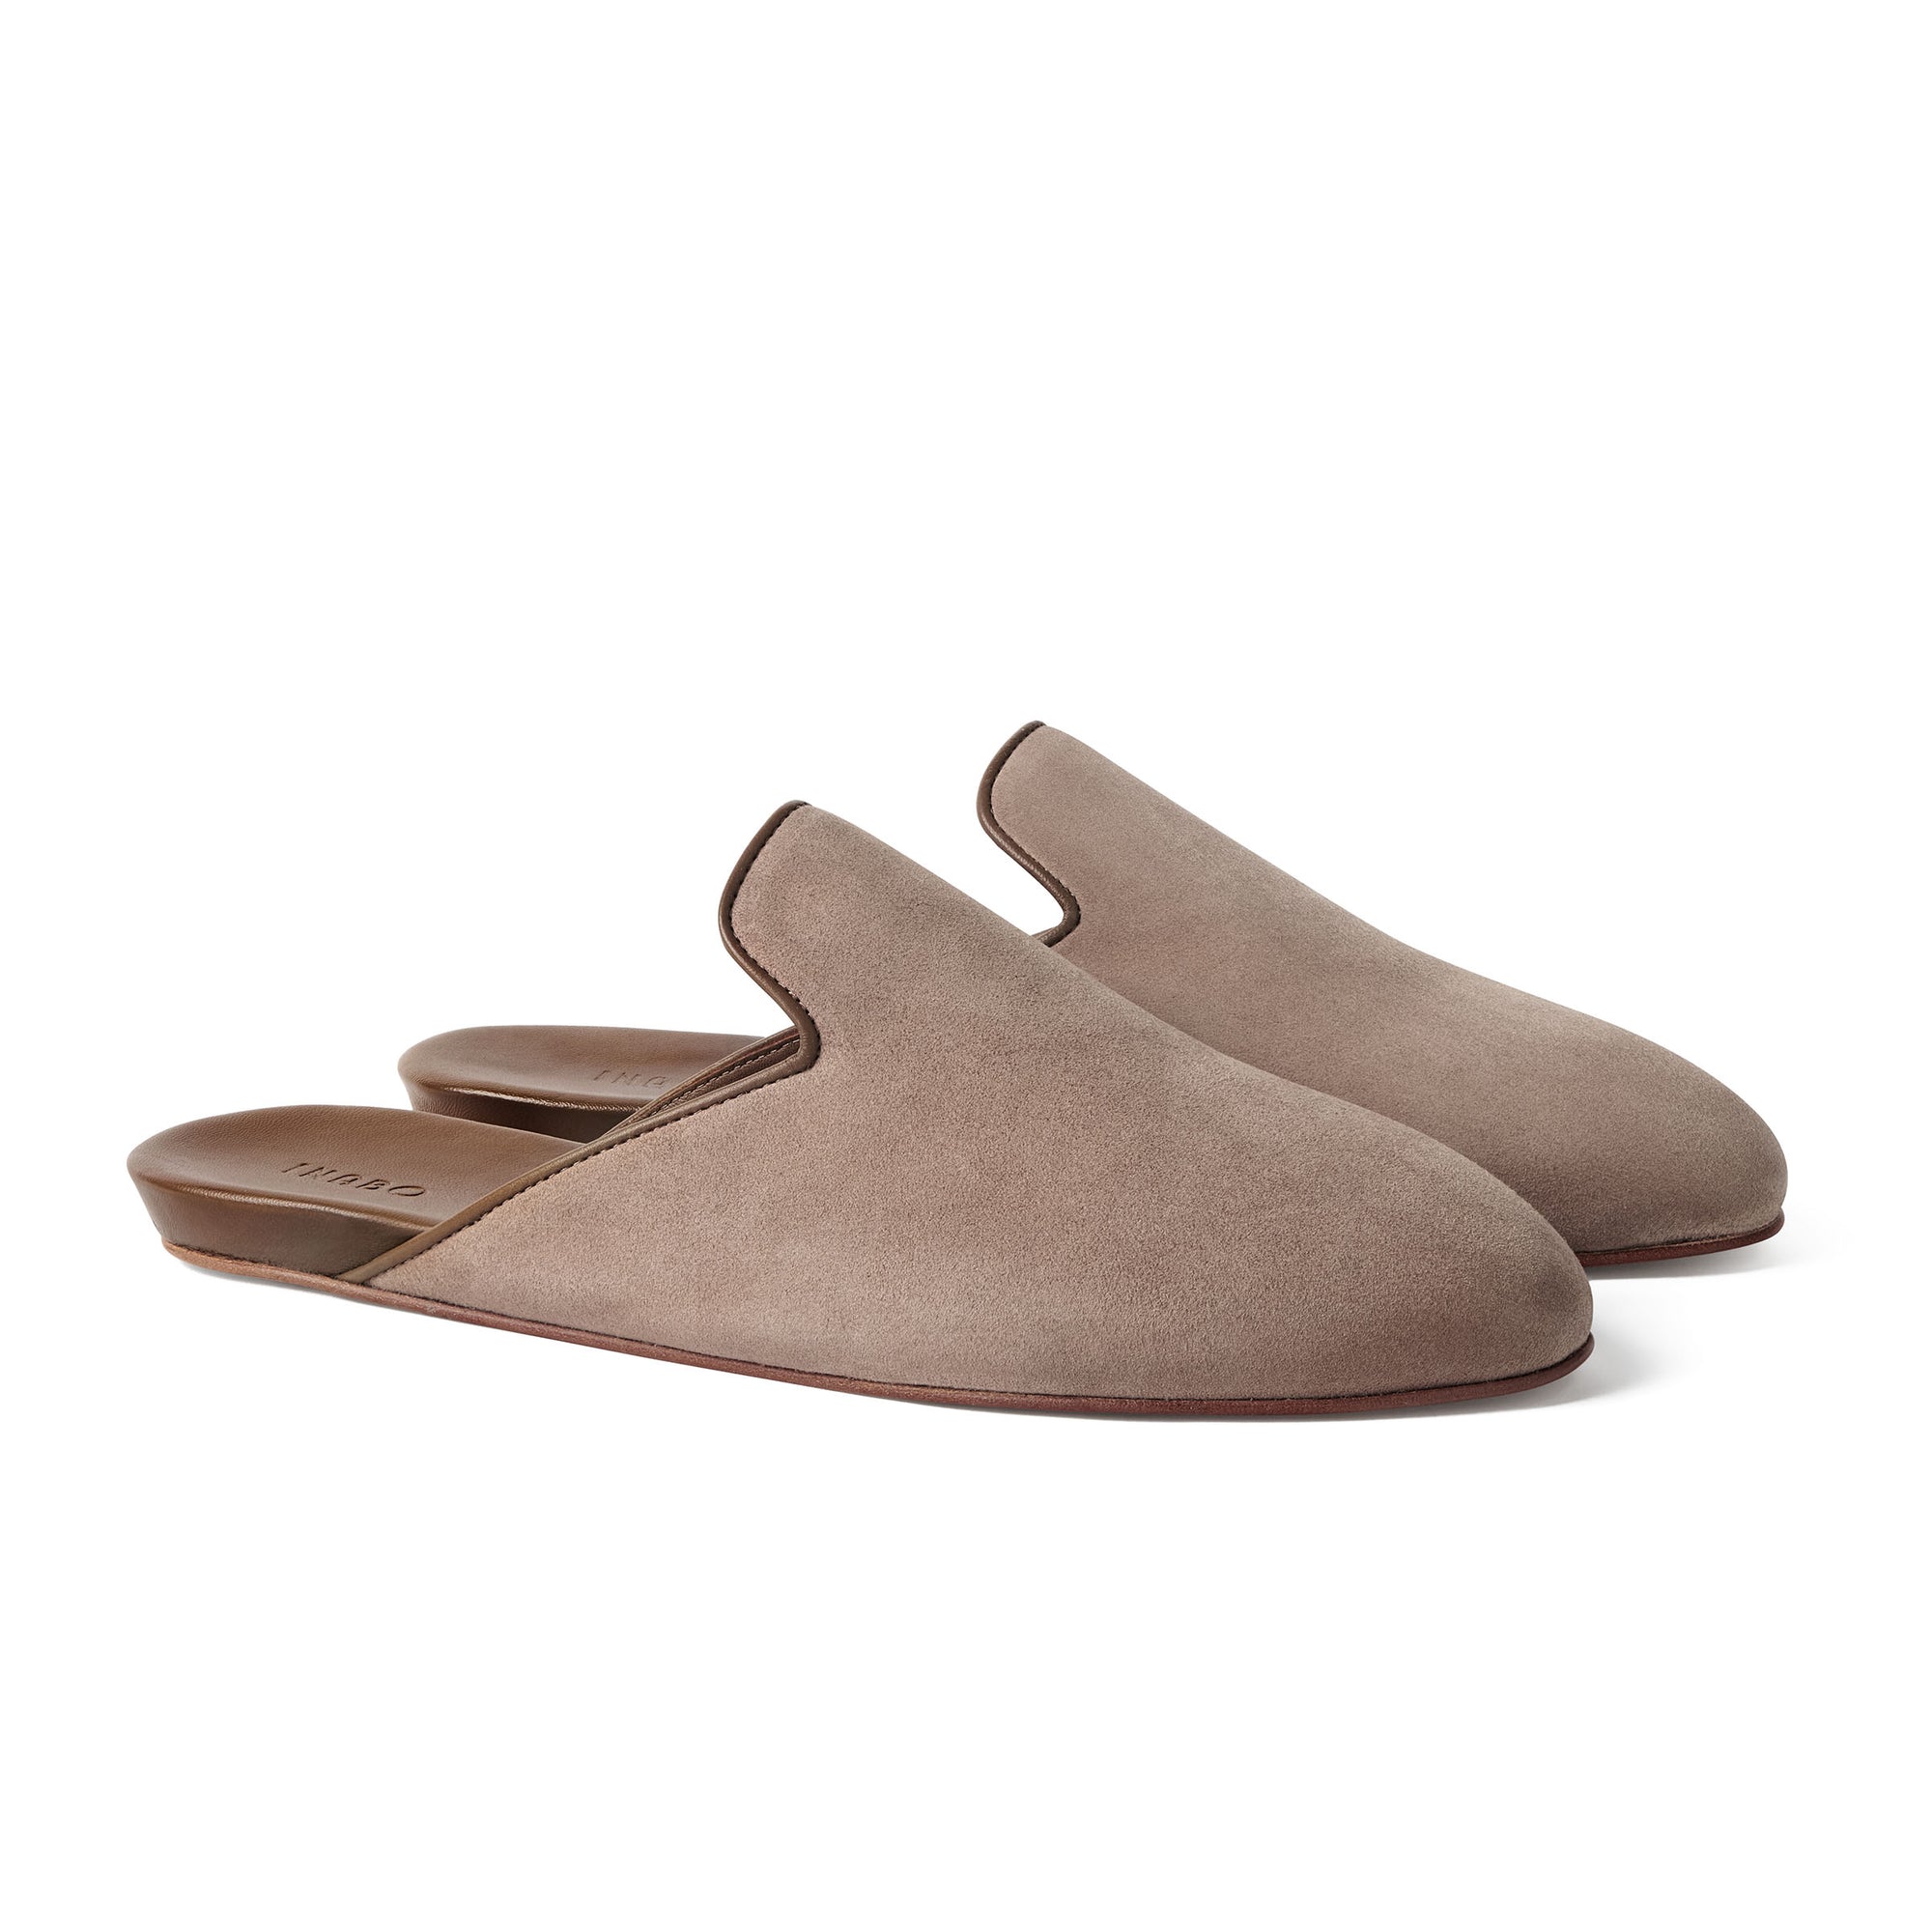 Inabo Men's Fritz Slipper in taupe suede 